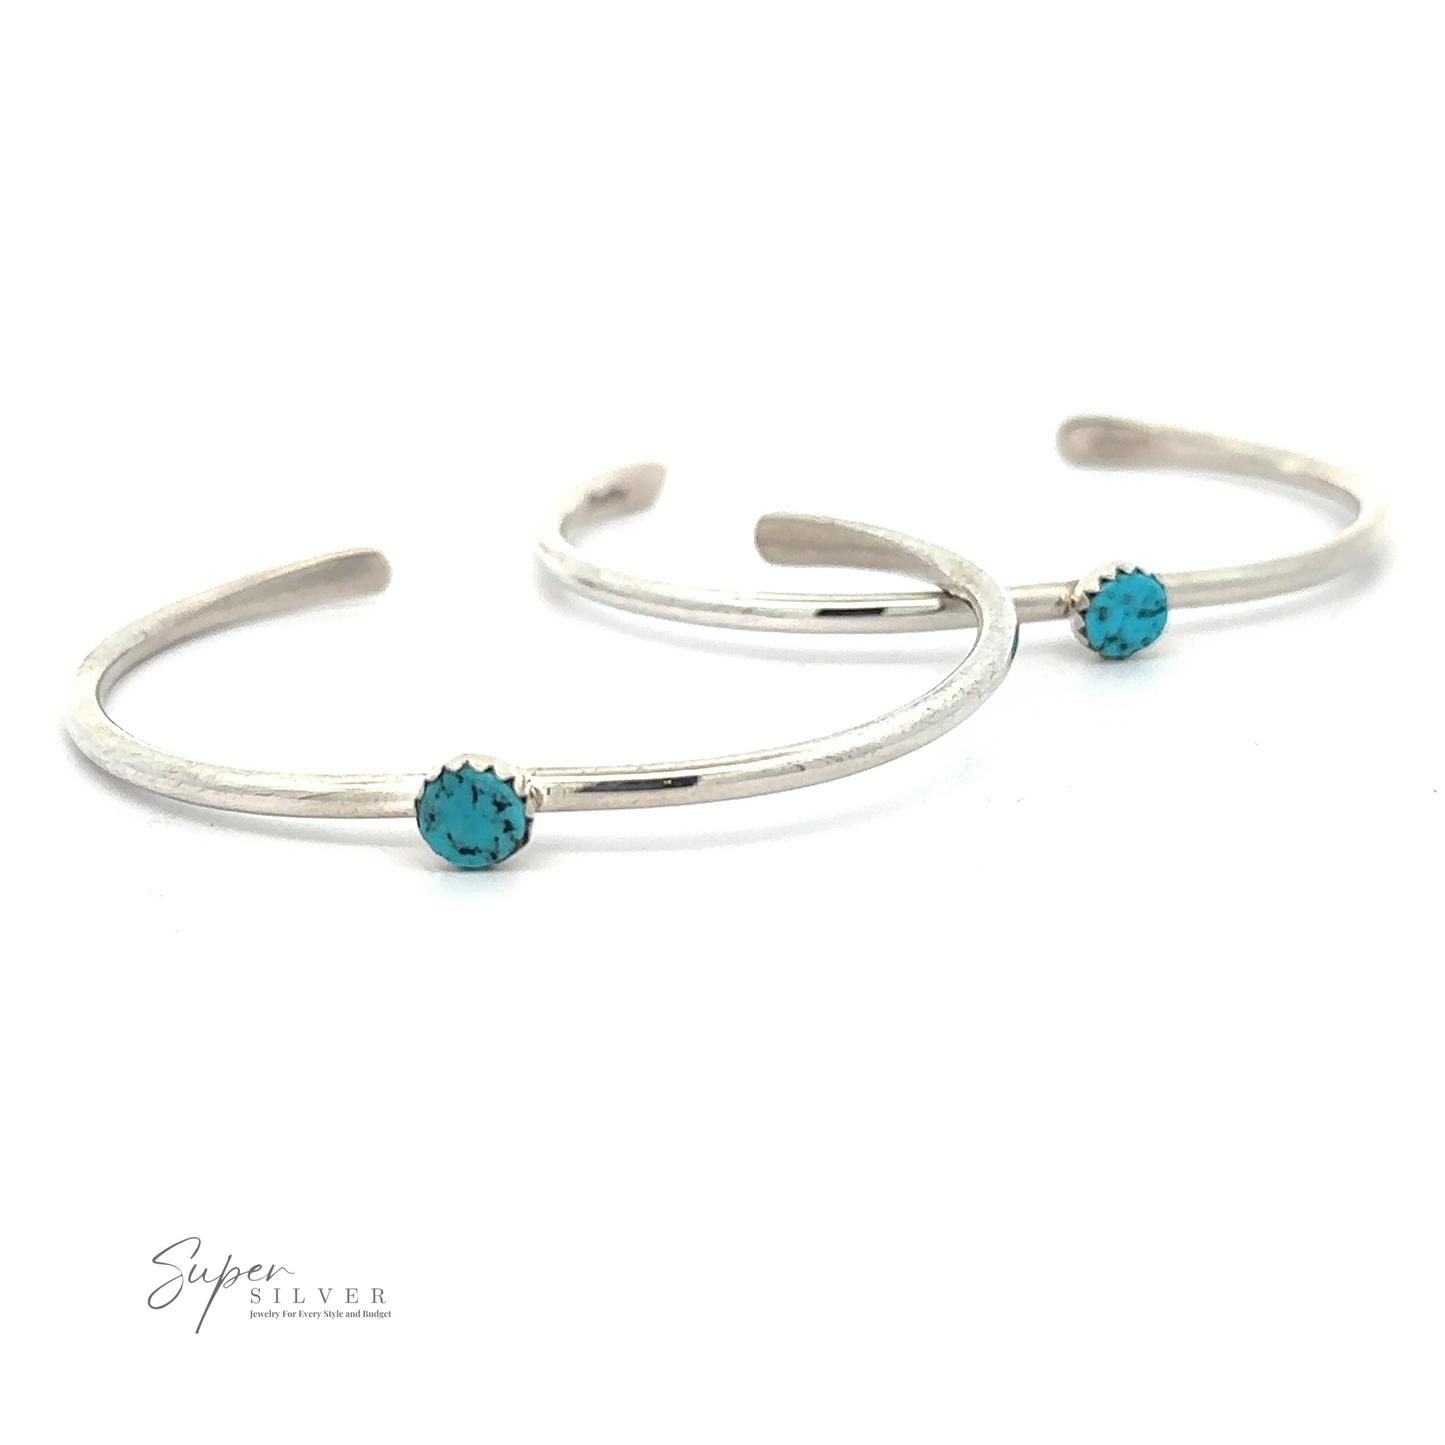 Two silver, minimalist bracelets, each featuring a single Kingman Turquoise stone, are displayed against a white background. The logo "Super Silver" is visible in the bottom left corner. The product name is Stackable Native American Turquoise Cuff.